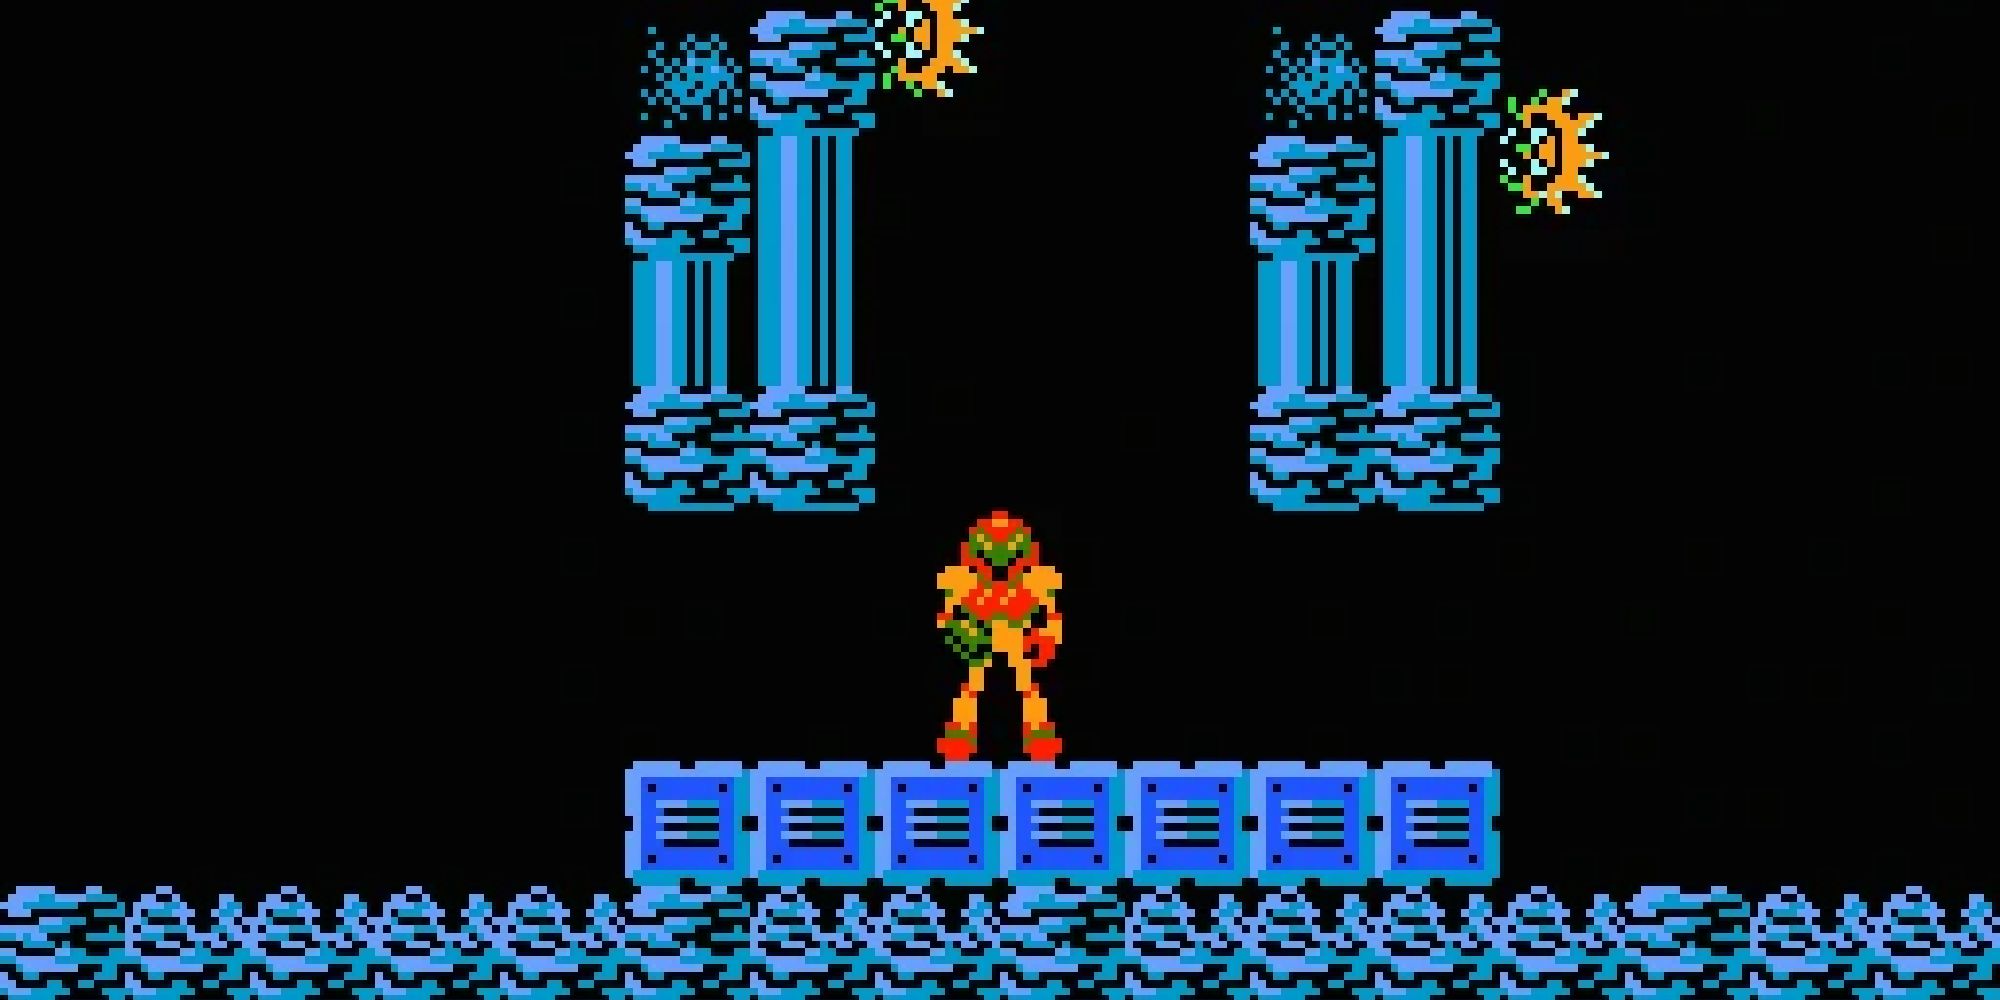 Samus standing on a platform in the starting area of NES Metroid